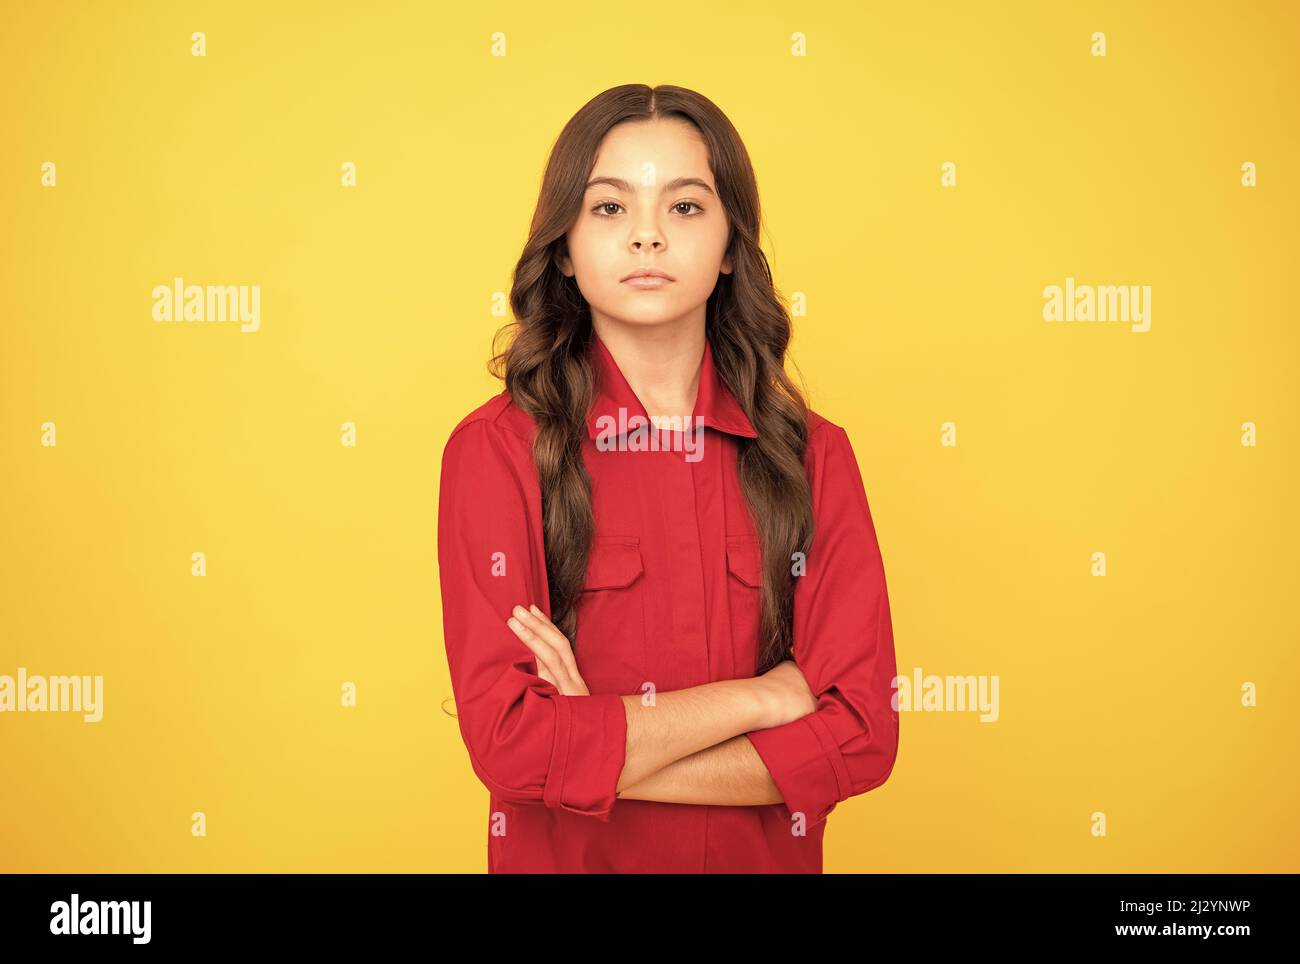 confident and serious teenager girl in red shirt crossed hands, confidence Stock Photo